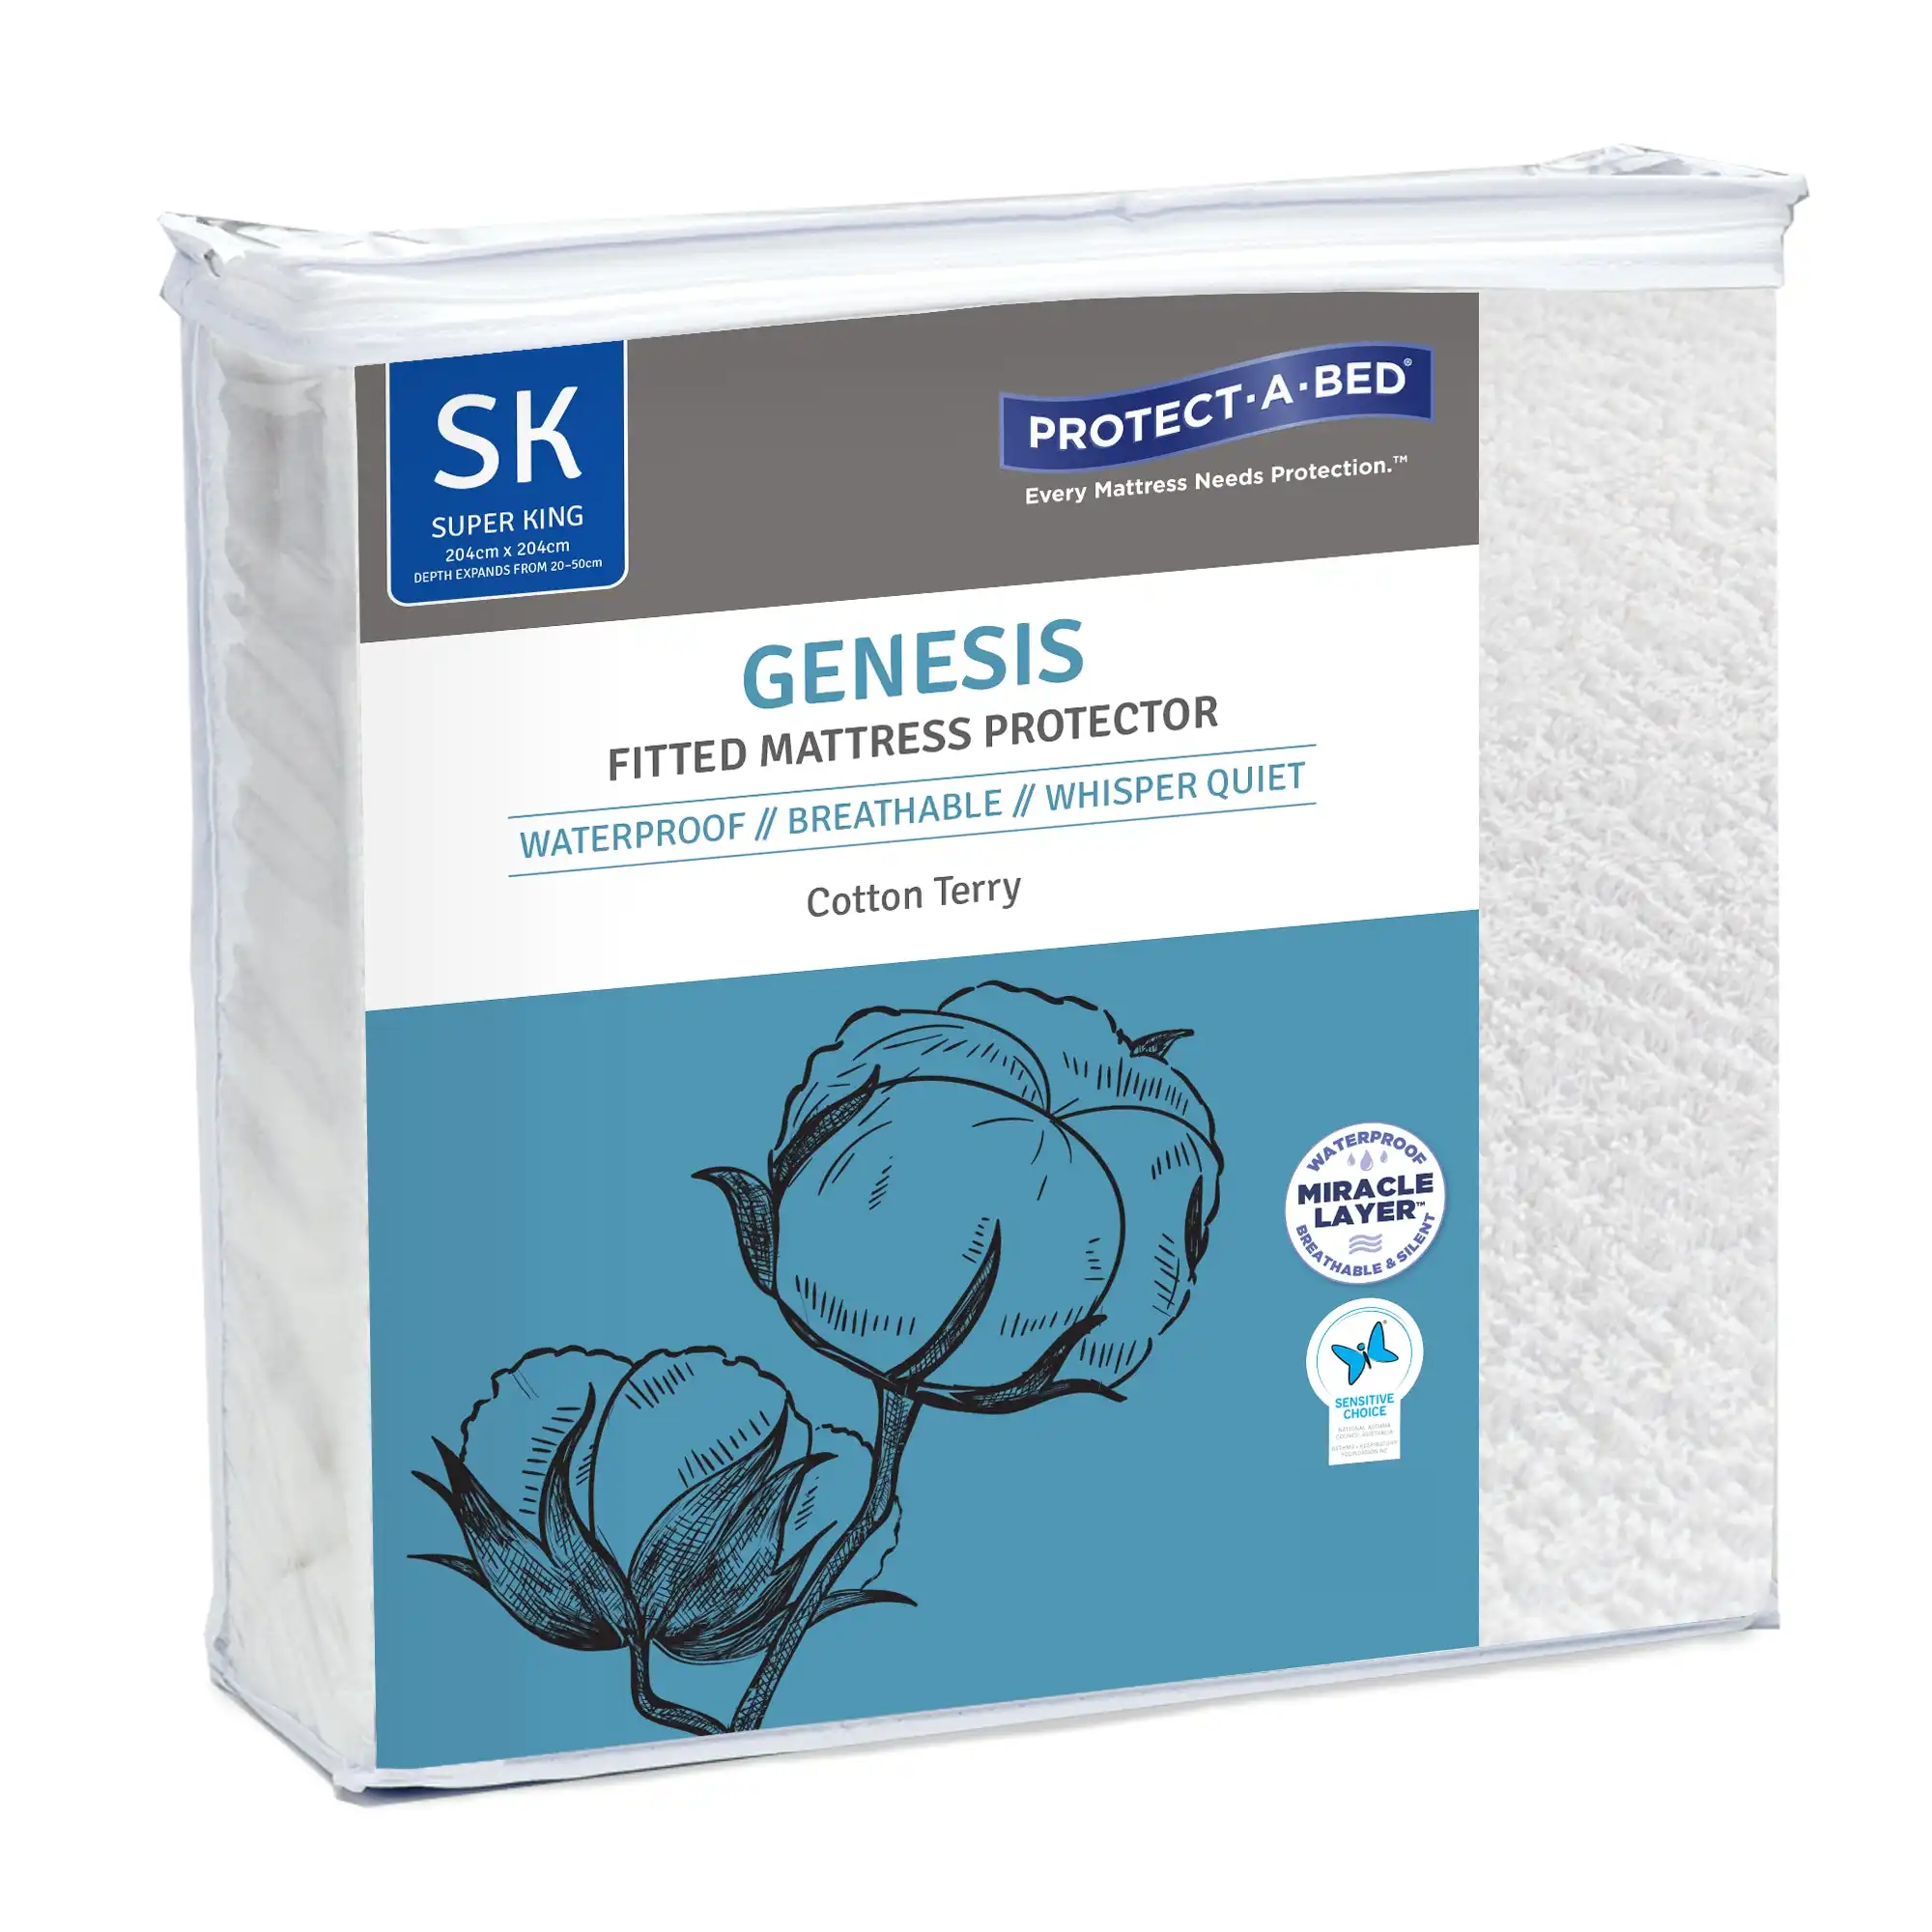 Protect A Bed Genesis Votton Terry Fitted Waterproof Mattress & Pillow Protectors  ON SALE